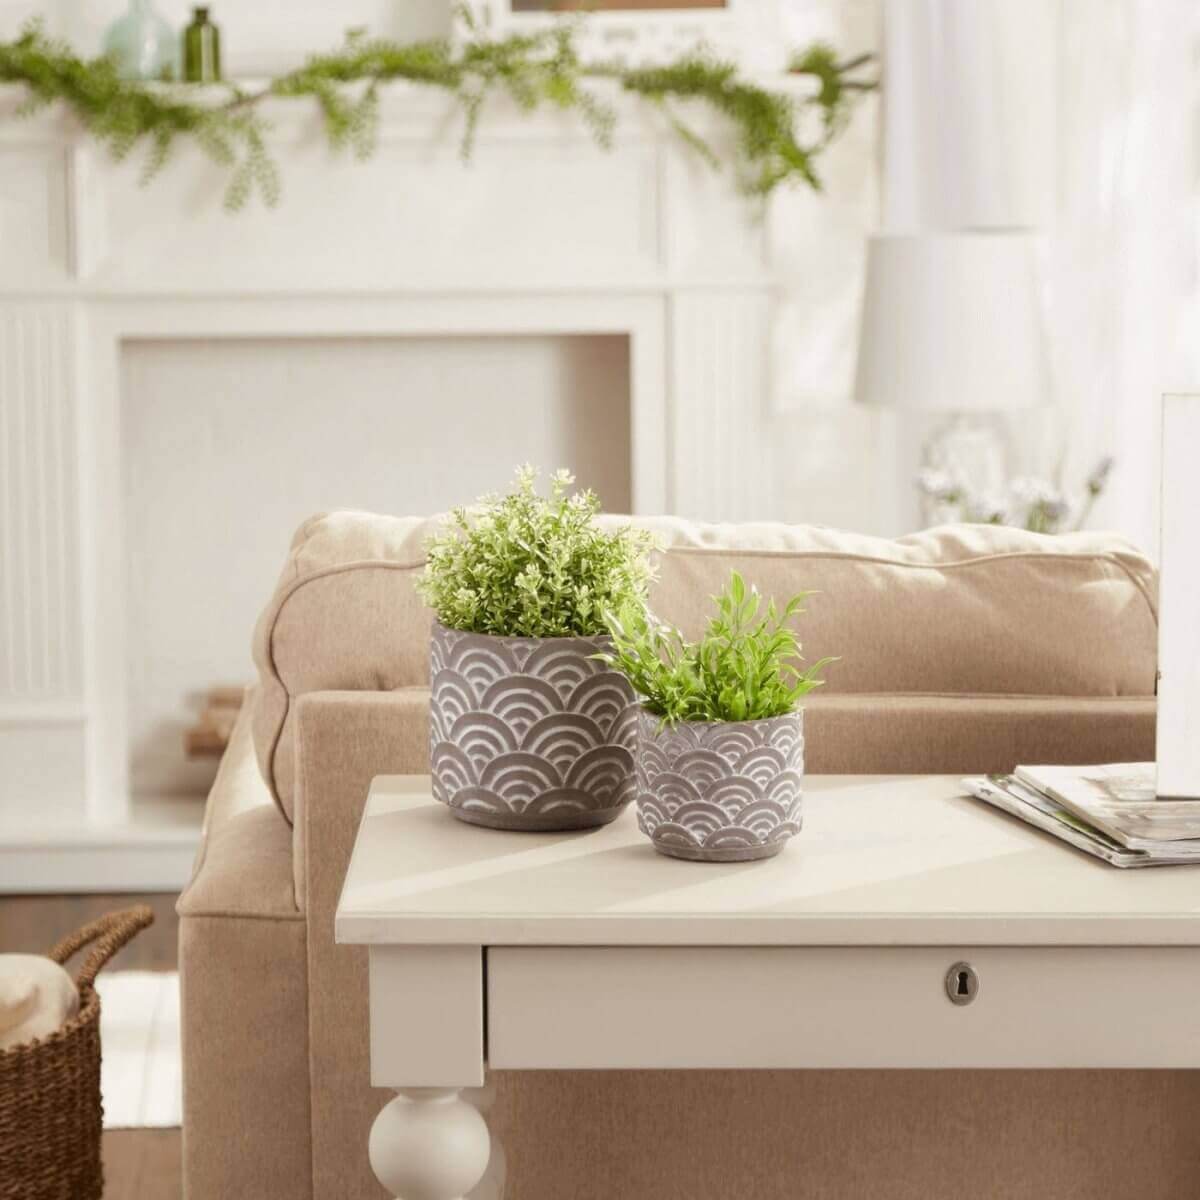 Cement Flower Pot Set - Taupe Scallop Design - Hearth Home & Living